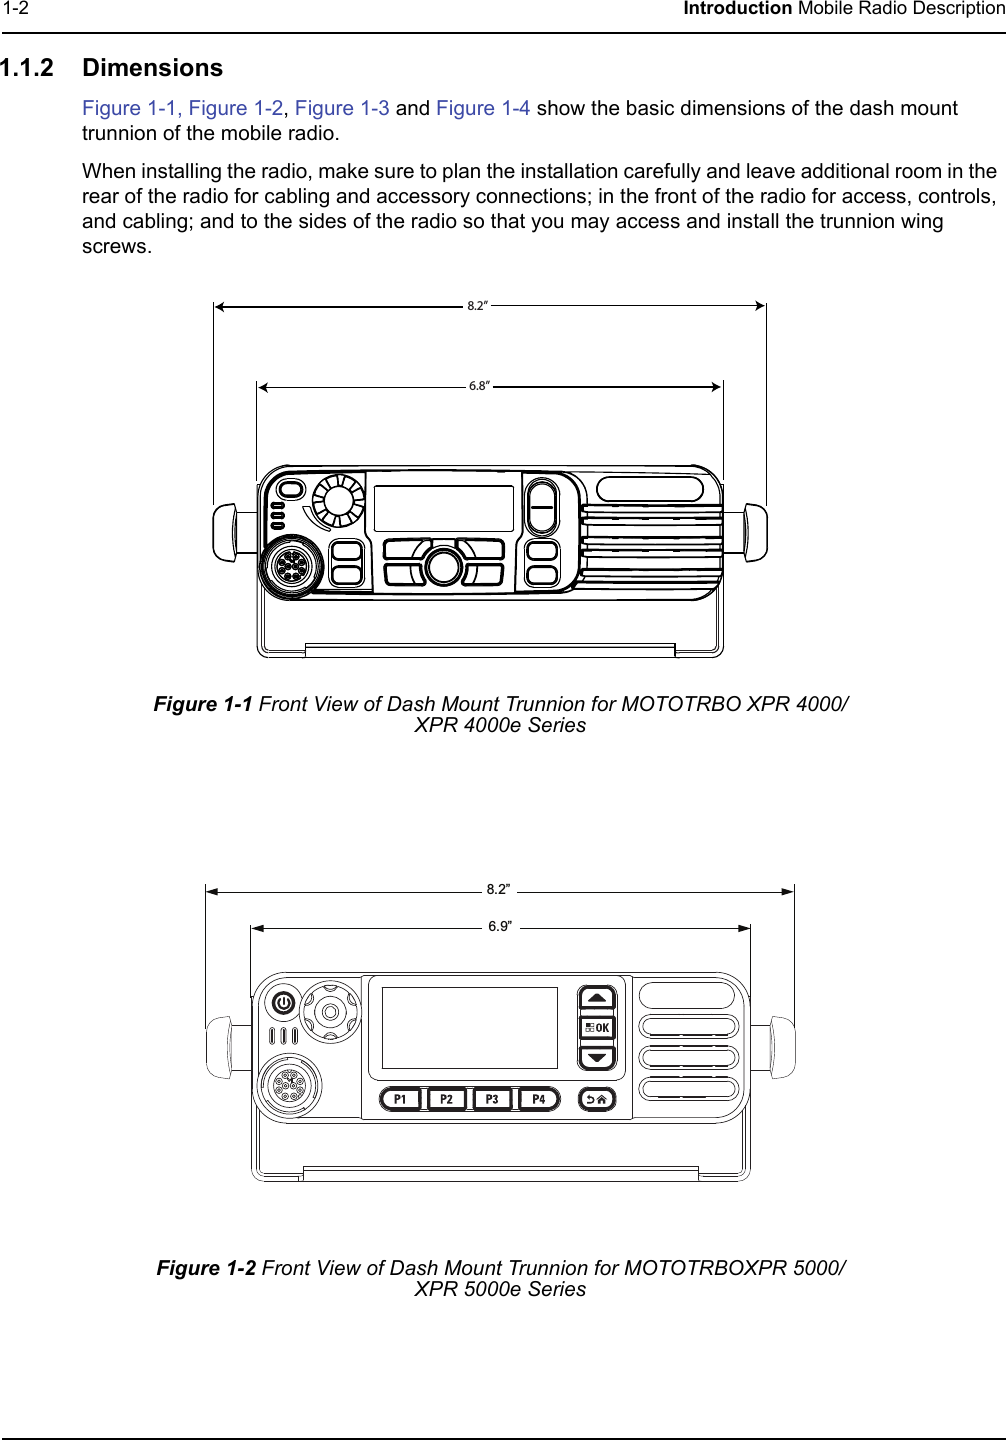 1-2 Introduction Mobile Radio Description1.1.2 DimensionsFigure 1-1, Figure 1-2, Figure 1-3 and Figure 1-4 show the basic dimensions of the dash mount trunnion of the mobile radio.When installing the radio, make sure to plan the installation carefully and leave additional room in the rear of the radio for cabling and accessory connections; in the front of the radio for access, controls, and cabling; and to the sides of the radio so that you may access and install the trunnion wing screws.Figure 1-1 Front View of Dash Mount Trunnion for MOTOTRBO XPR 4000/XPR 4000e SeriesFigure 1-2 Front View of Dash Mount Trunnion for MOTOTRBOXPR 5000/XPR 5000e Series 8.2”6.8”6.9”8.2”